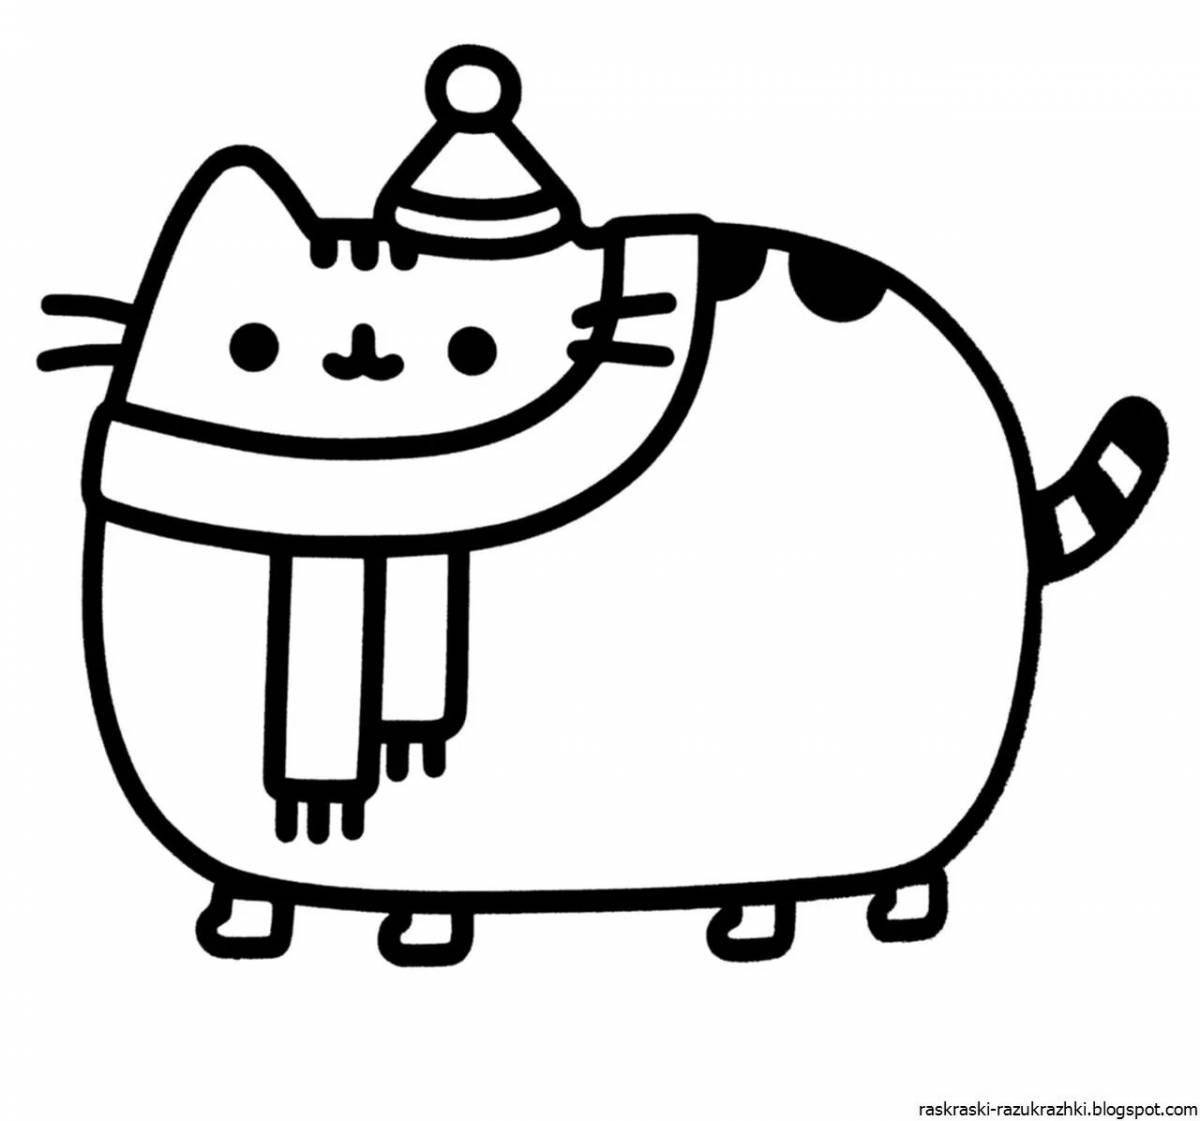 Sunny pusheen cat coloring page